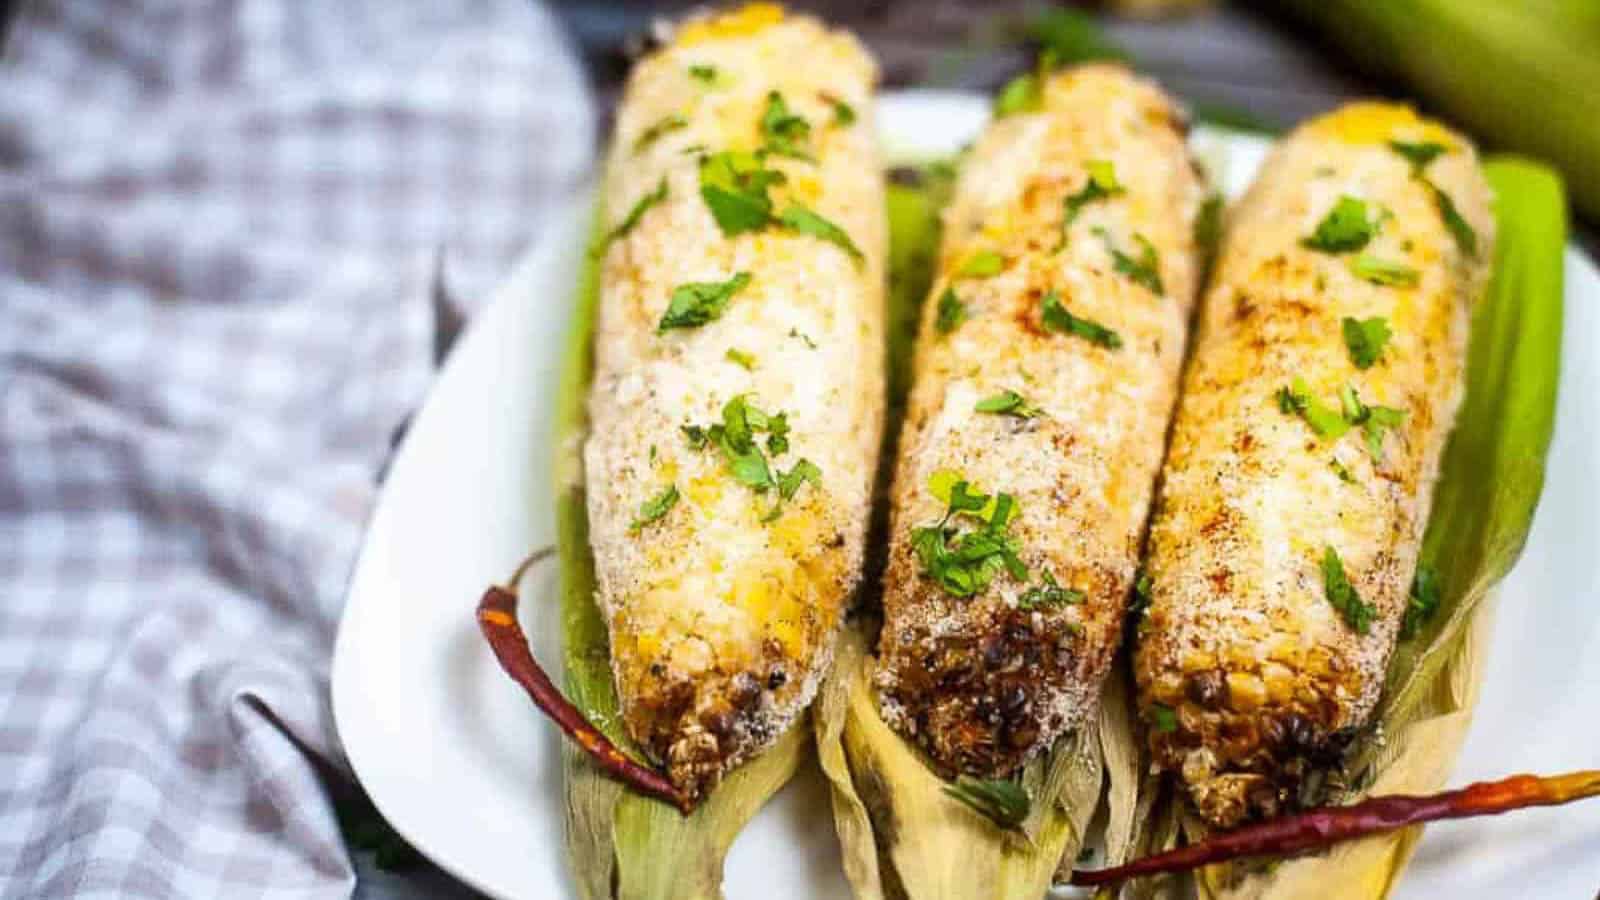 metal baking pan with elote, Mexican grilled corn cobs with mayonnaise, spices, and cheese.